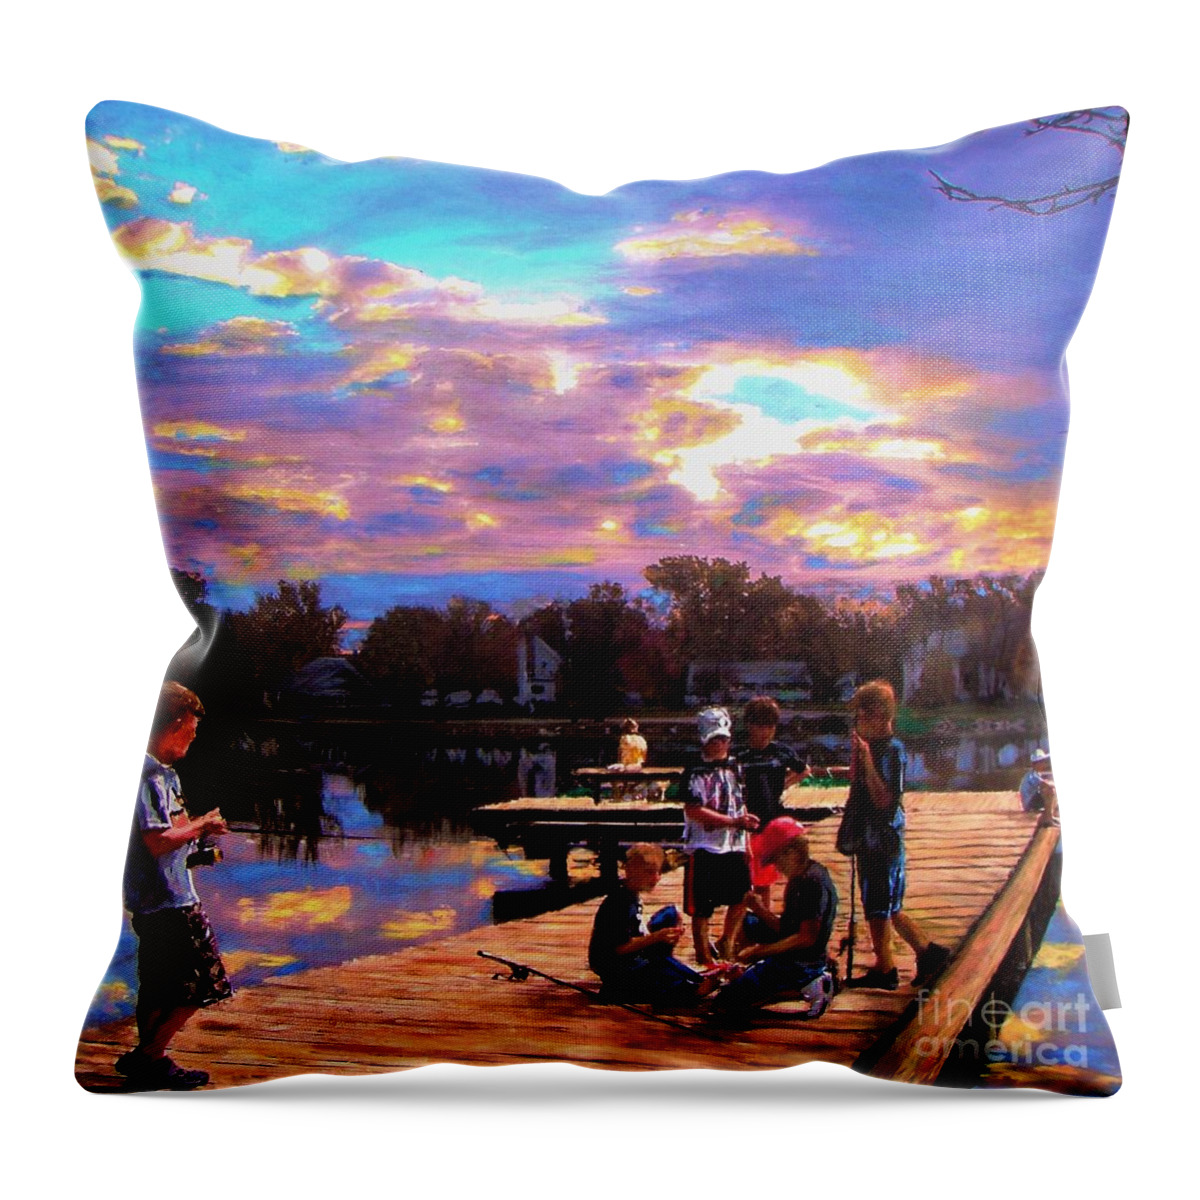 Fishing Throw Pillow featuring the painting Boys On The Dock by Randy Sprout